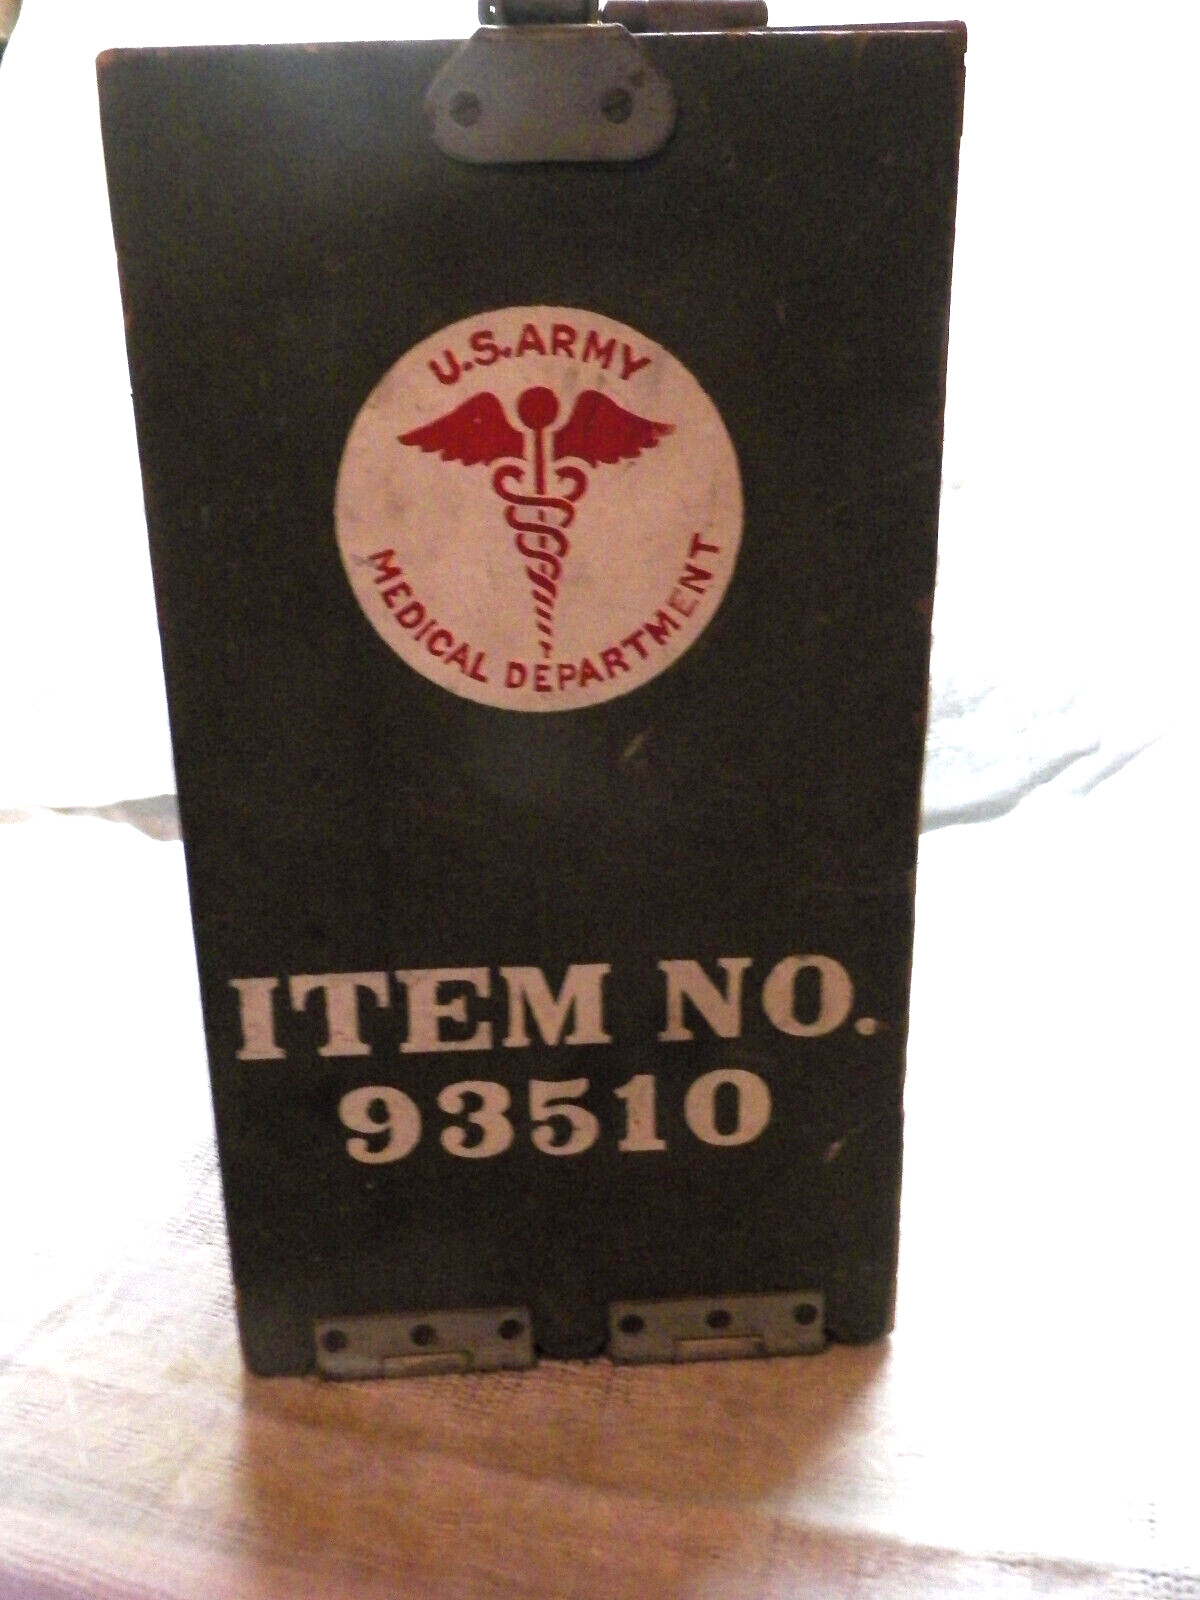 RARE WW II US ARMY MEDICAL  ANESTHESIA WOOD ITEM NO. 93510 WITH DRAWERS